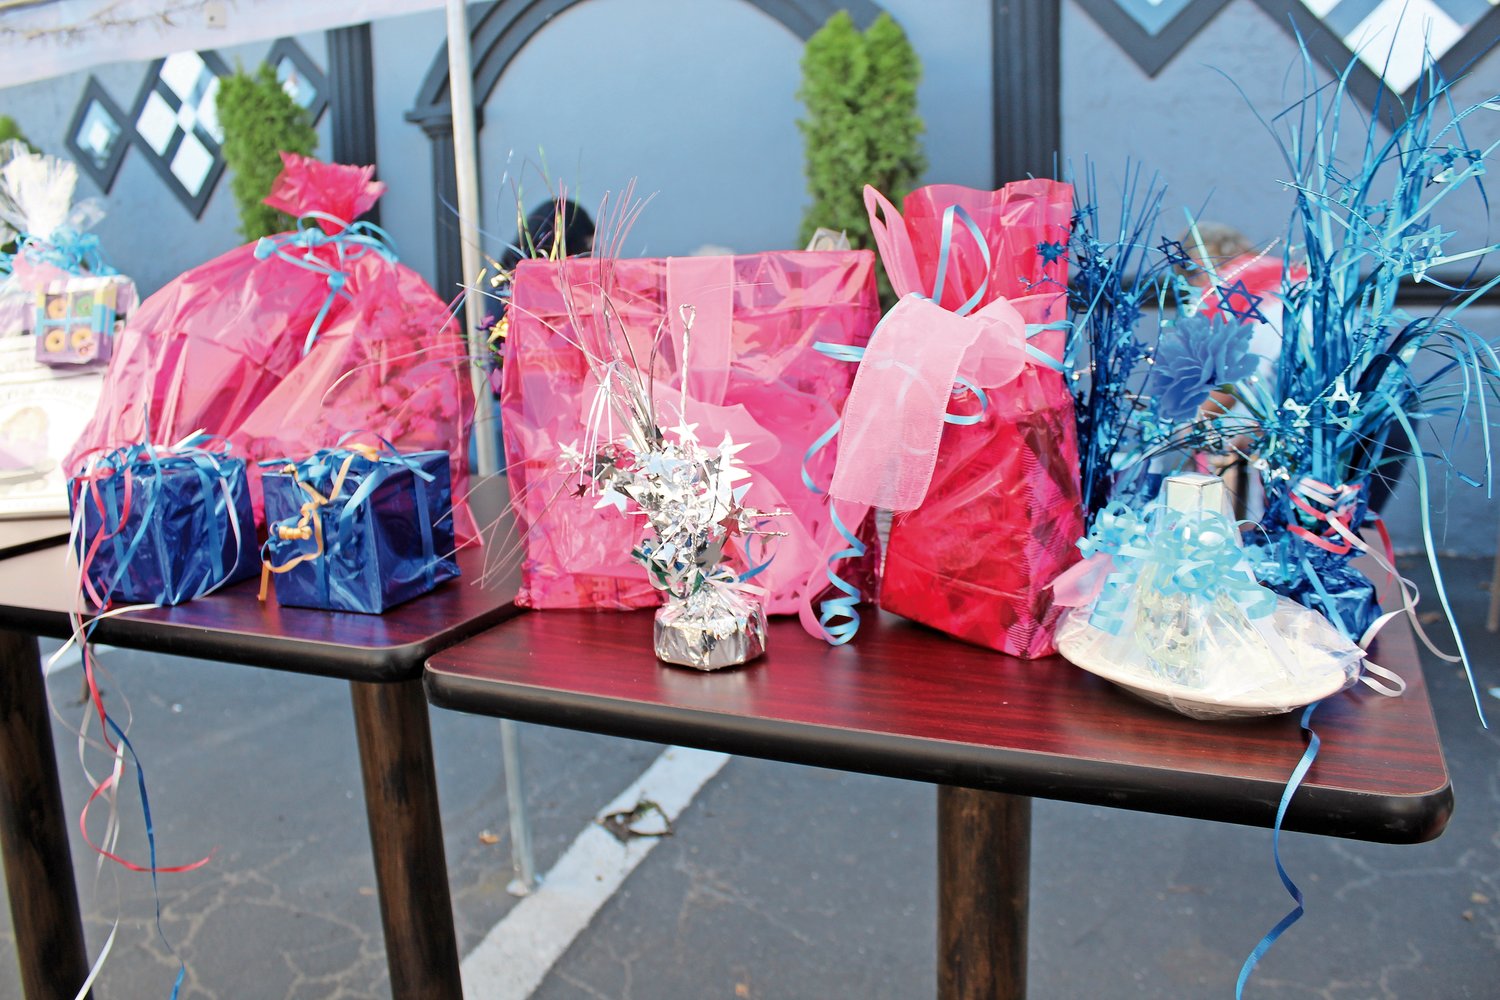 Local West Hempstead businesses donated raffle baskets, whose proceeds were to go to the Kiwanis Club.